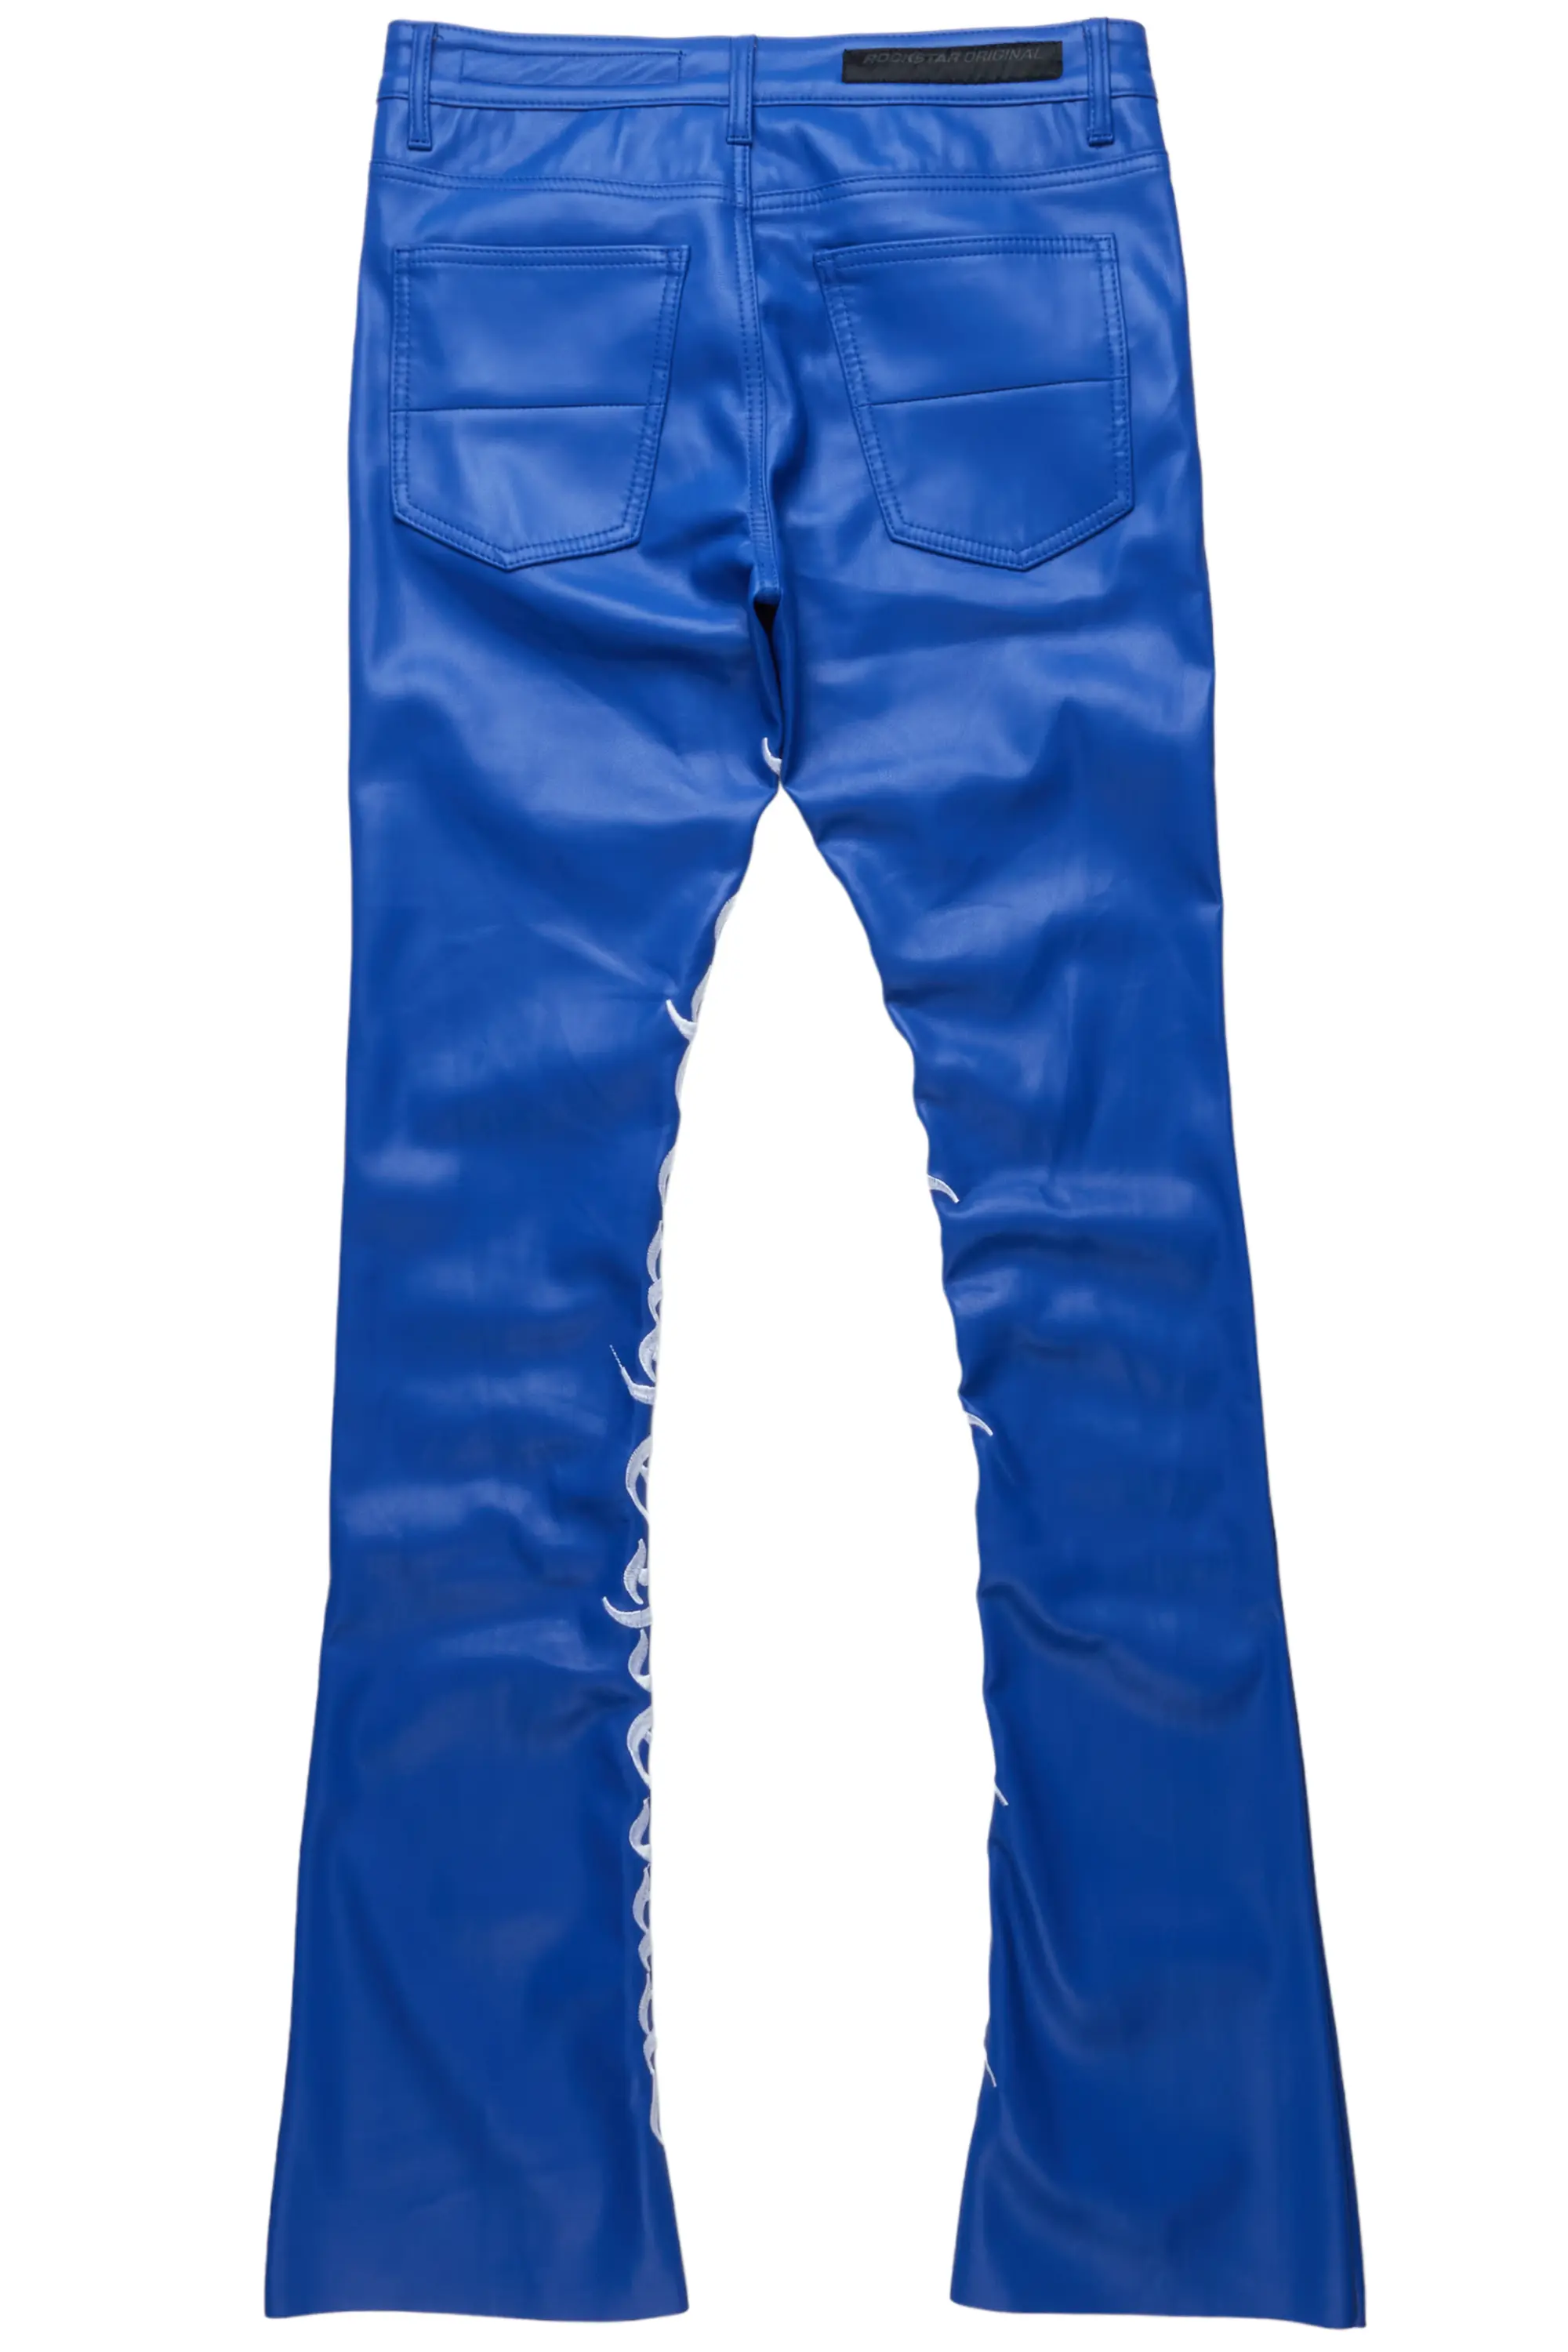 Eliam Blue/White Faux Leather Stacked Flare Jean